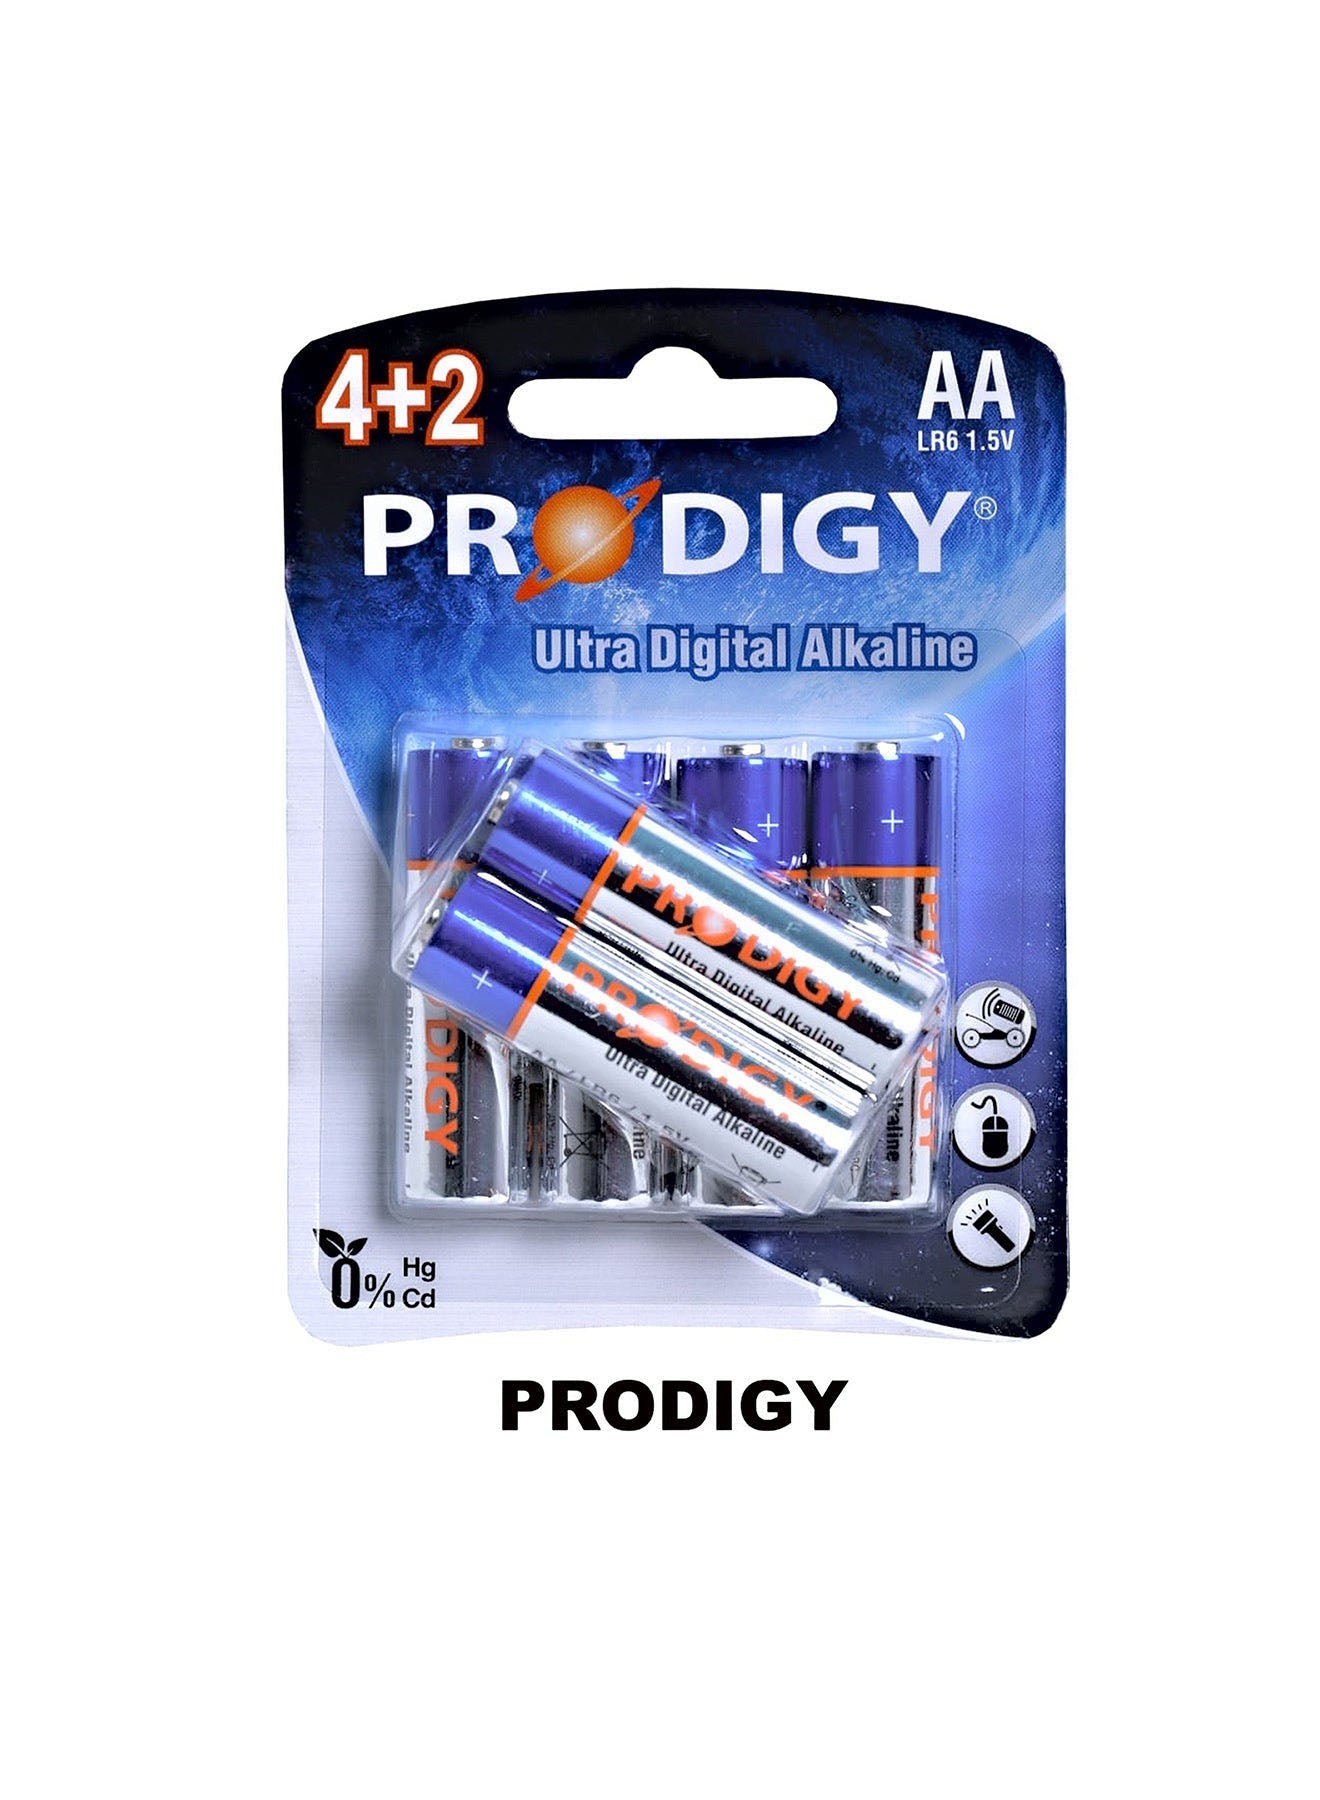 Prodigy Alkaline LR6UD 42B AA6 Value Pack of 2 